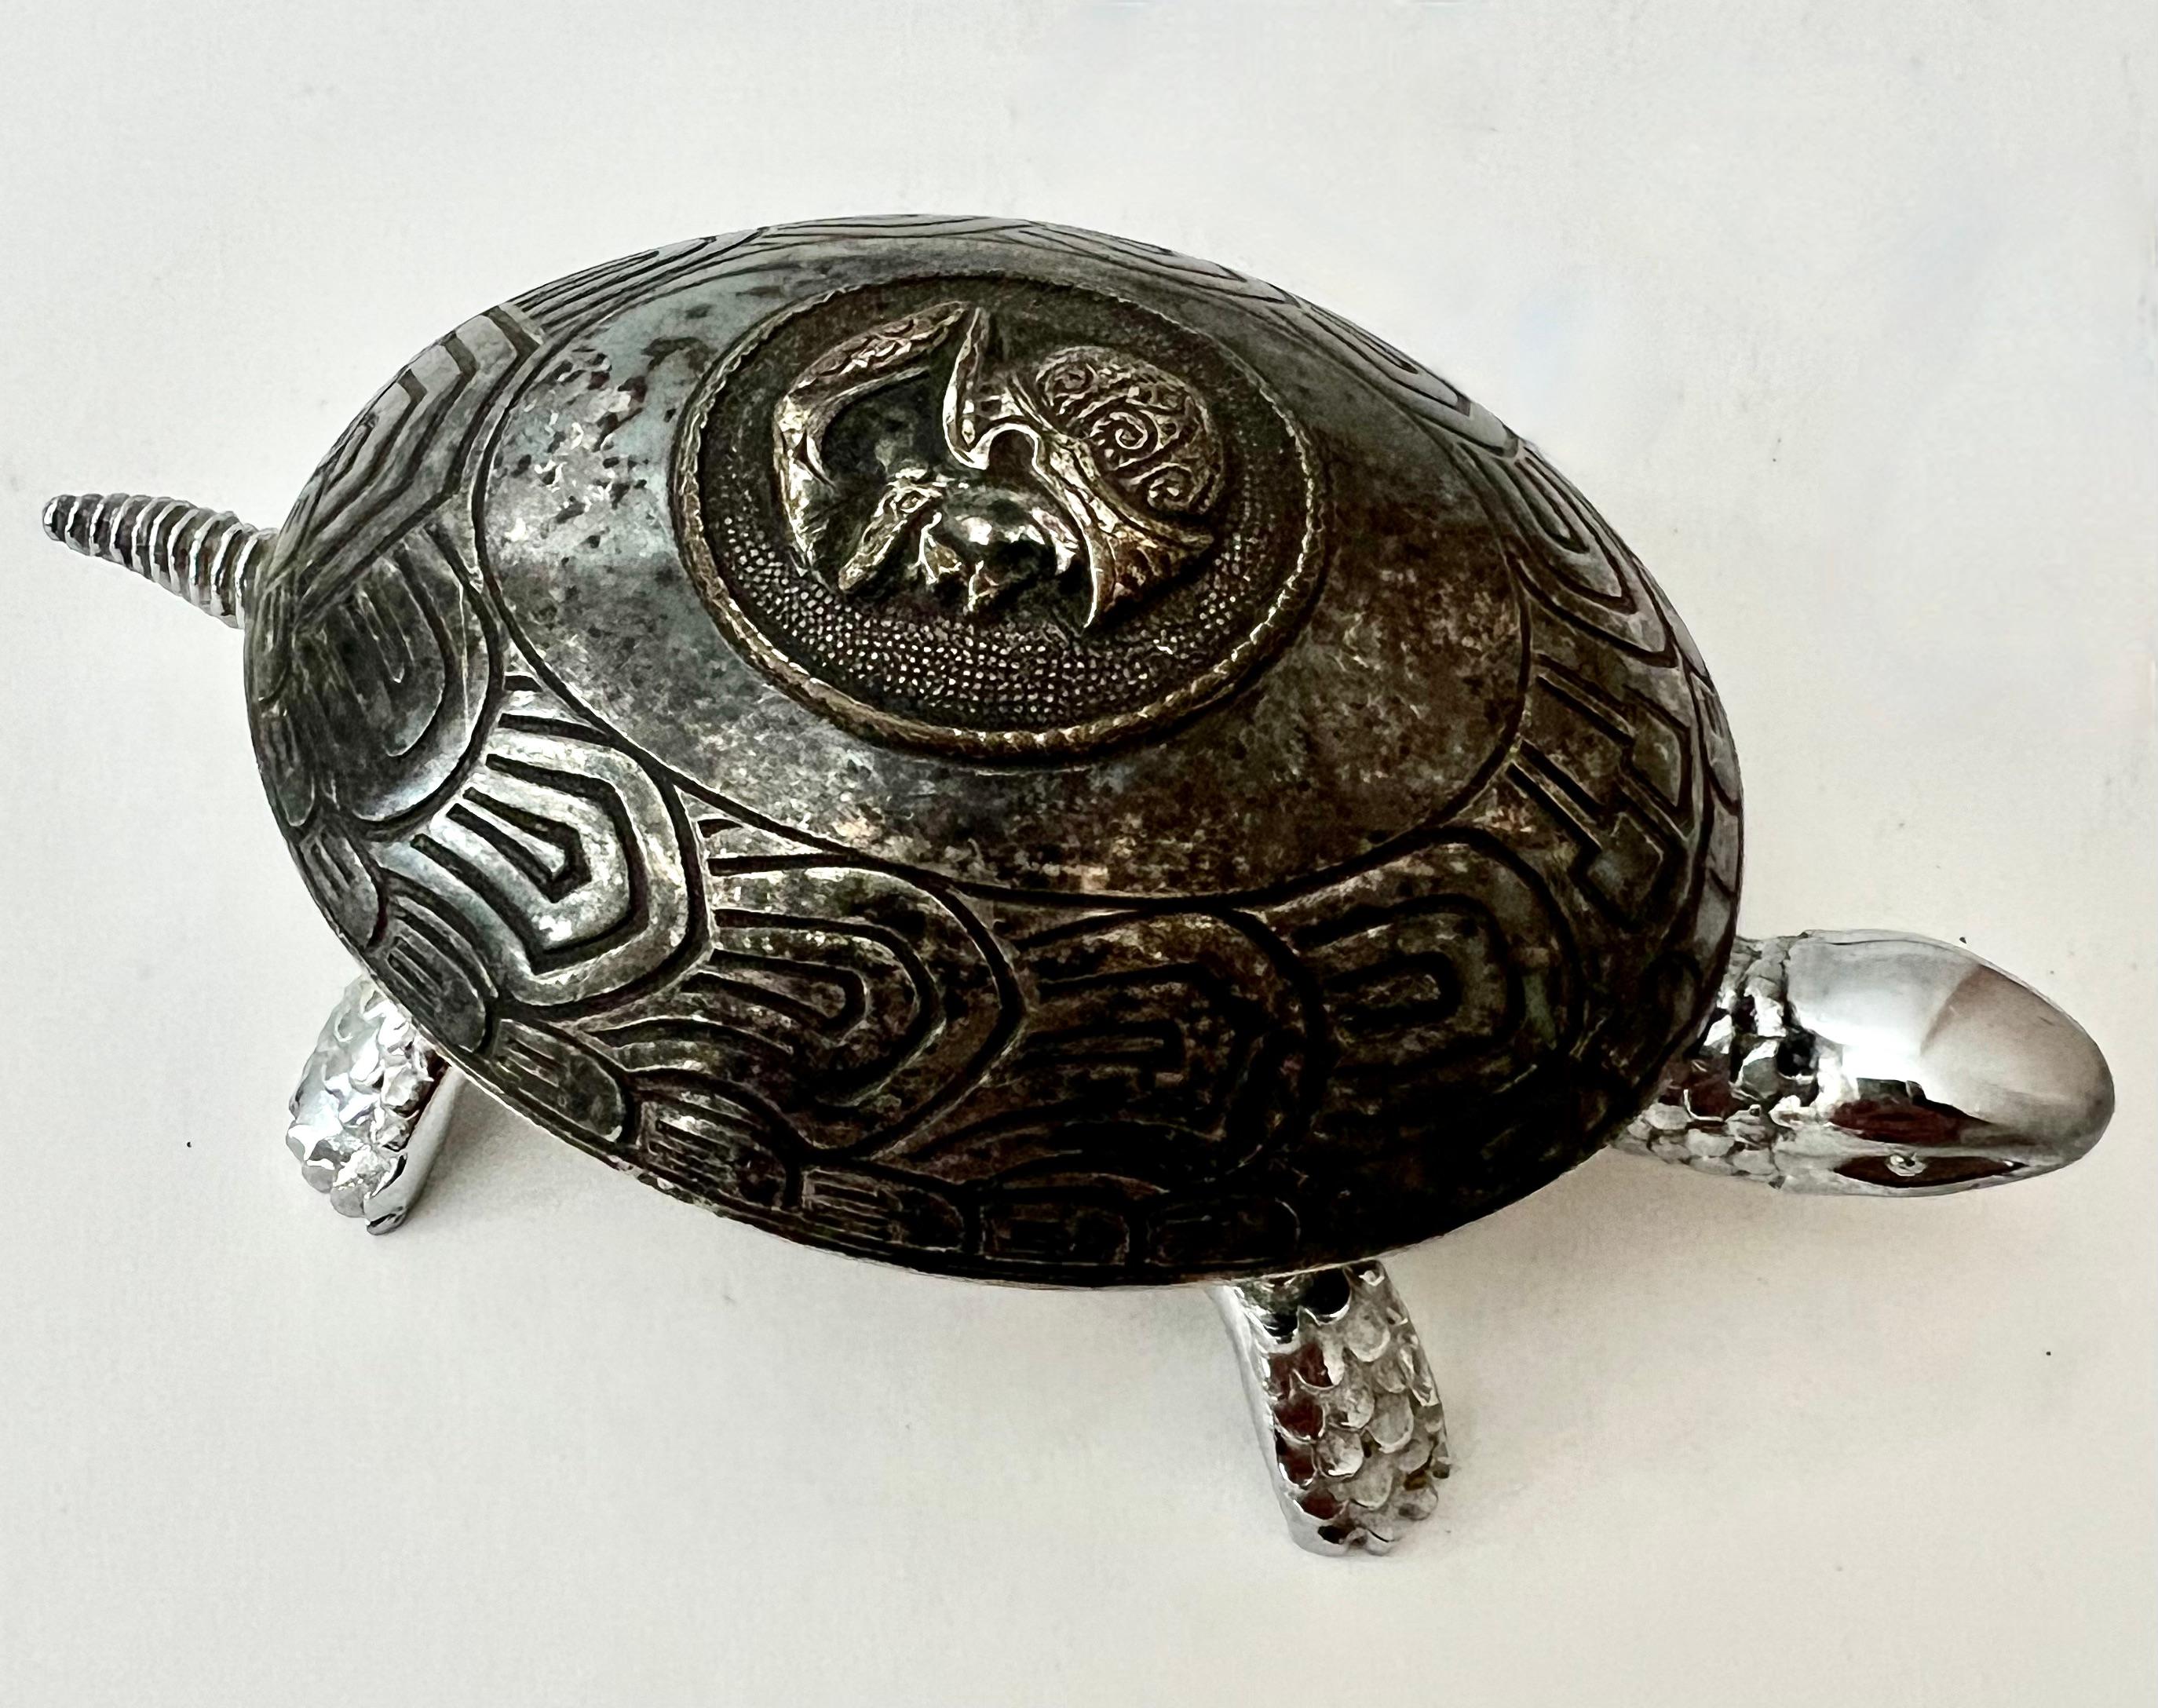 A delightful turtle - decorative when resting, however the piece winds and, after winding, when the tail or head are pressed a bell rings - a compliment to many spaces. As a decorative piece, in any room. 

Also, perfect for a commercial space